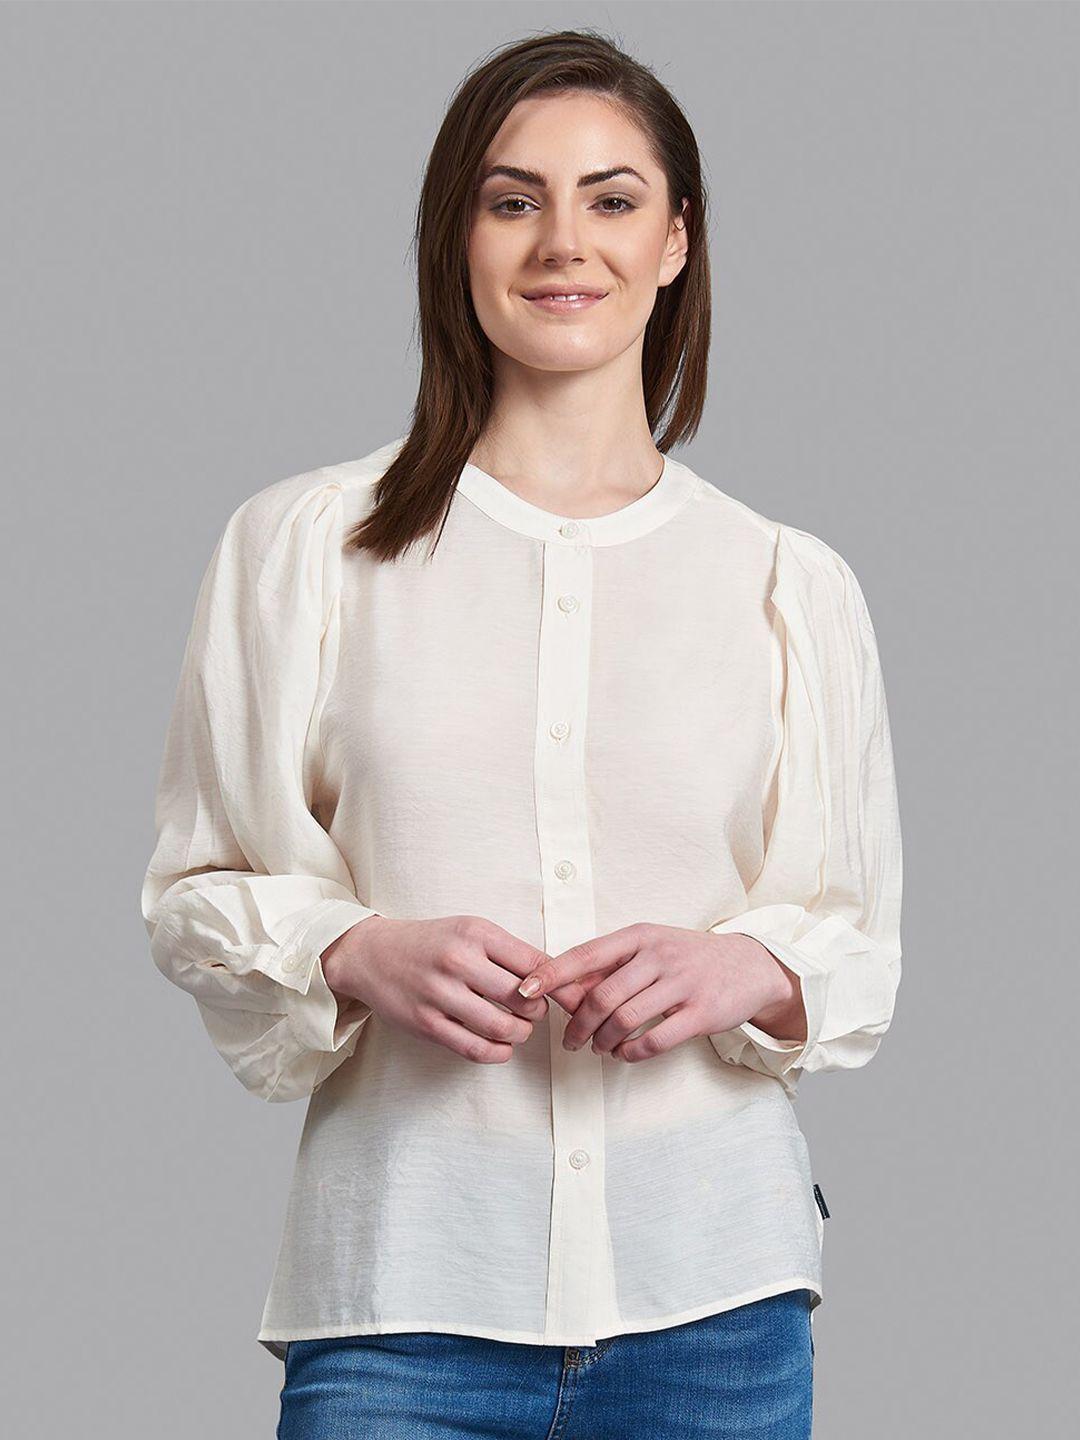 beverly hills polo club women off white regular fit casual shirt